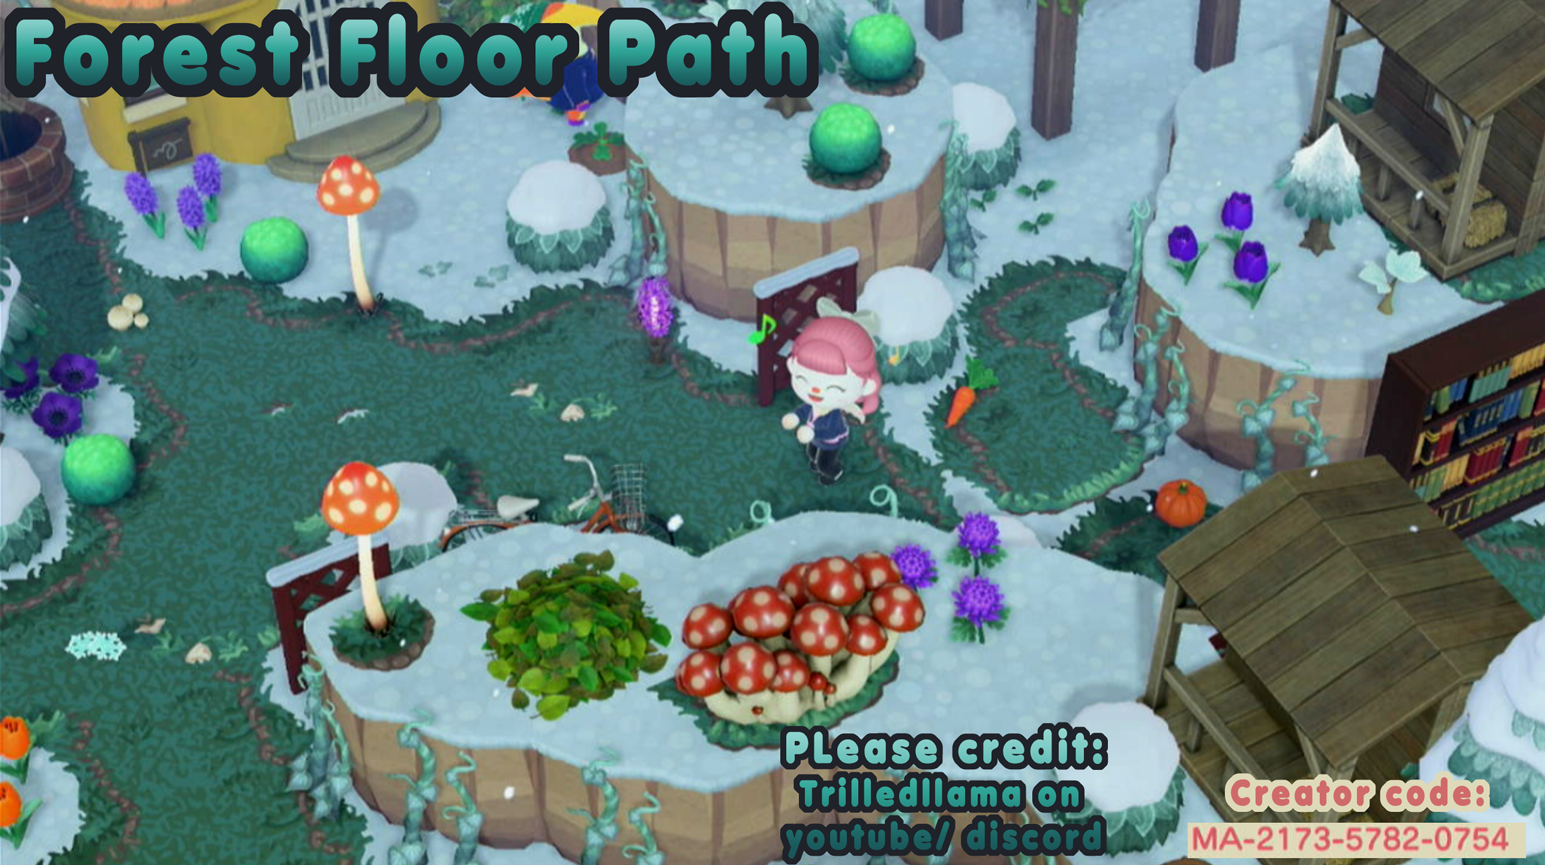 Animal Crossing Made a grass path for my forest